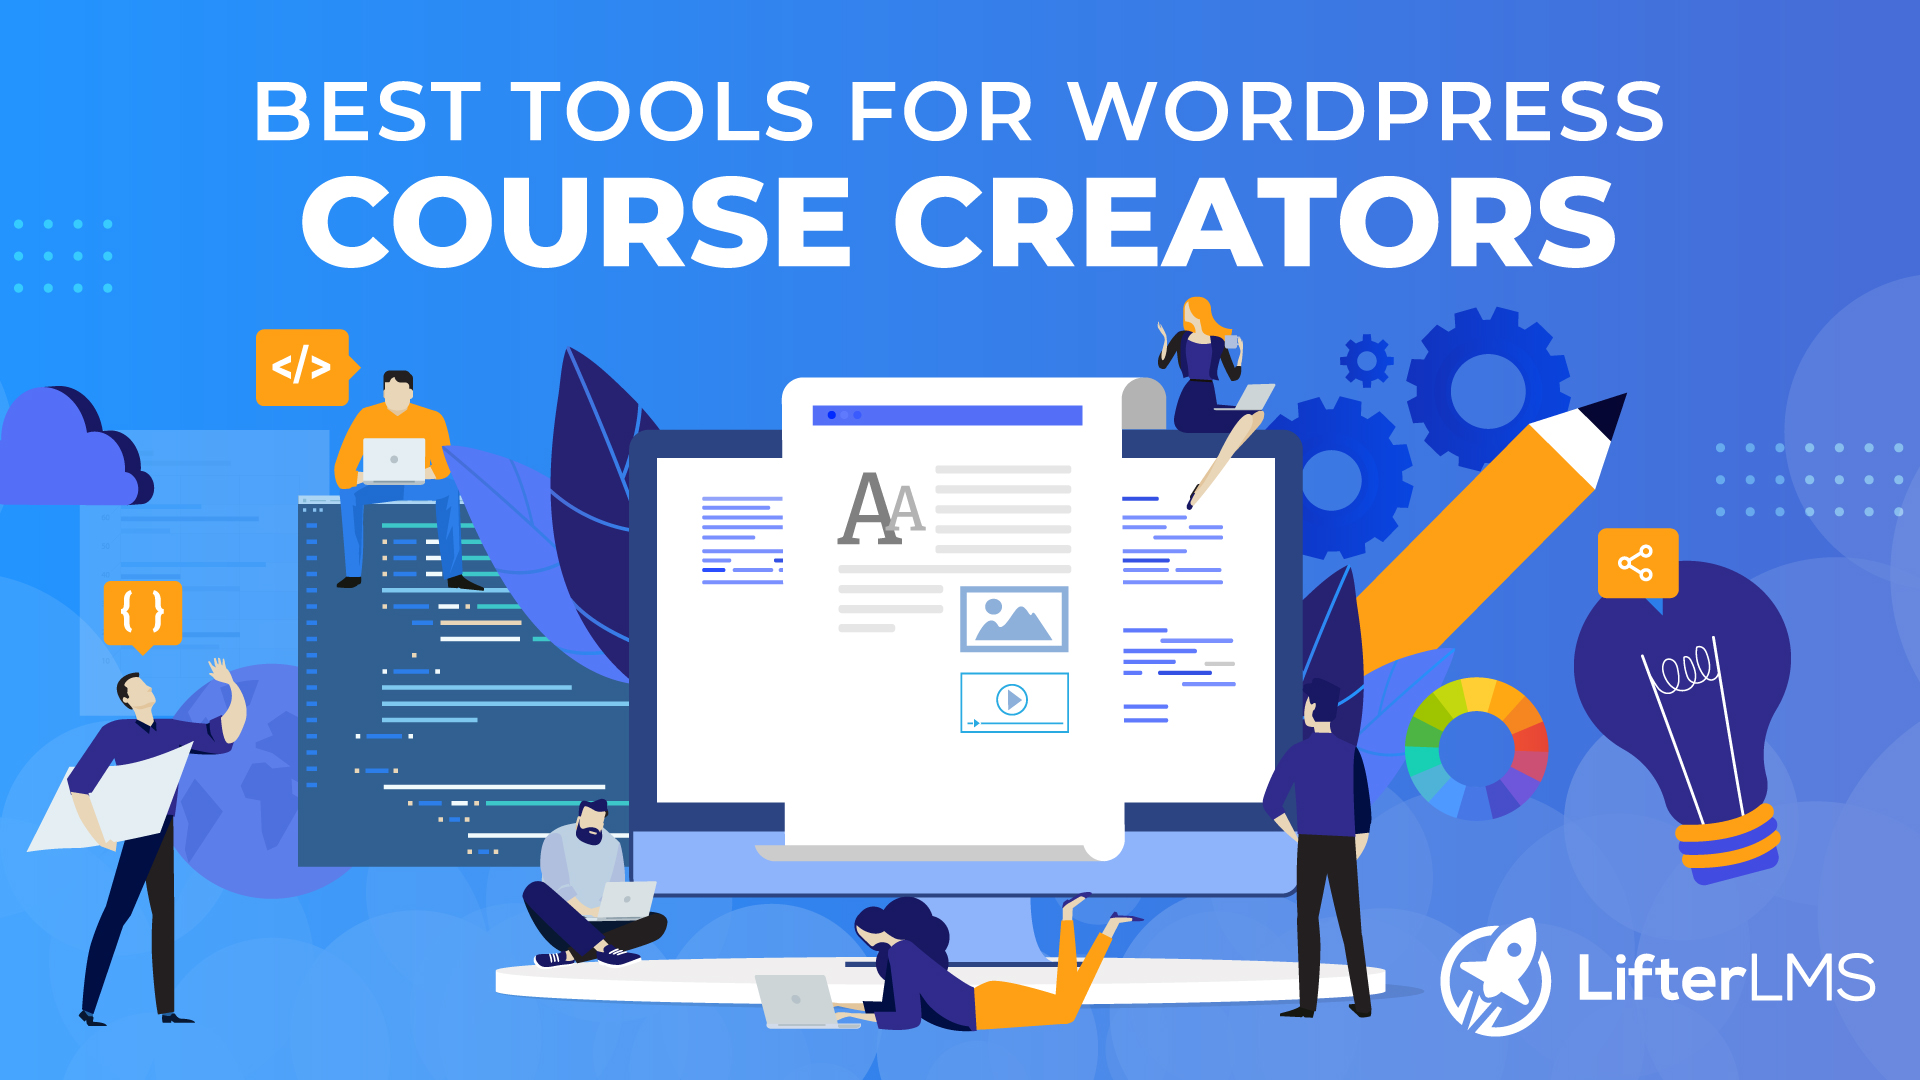 WordPress course content creation tools